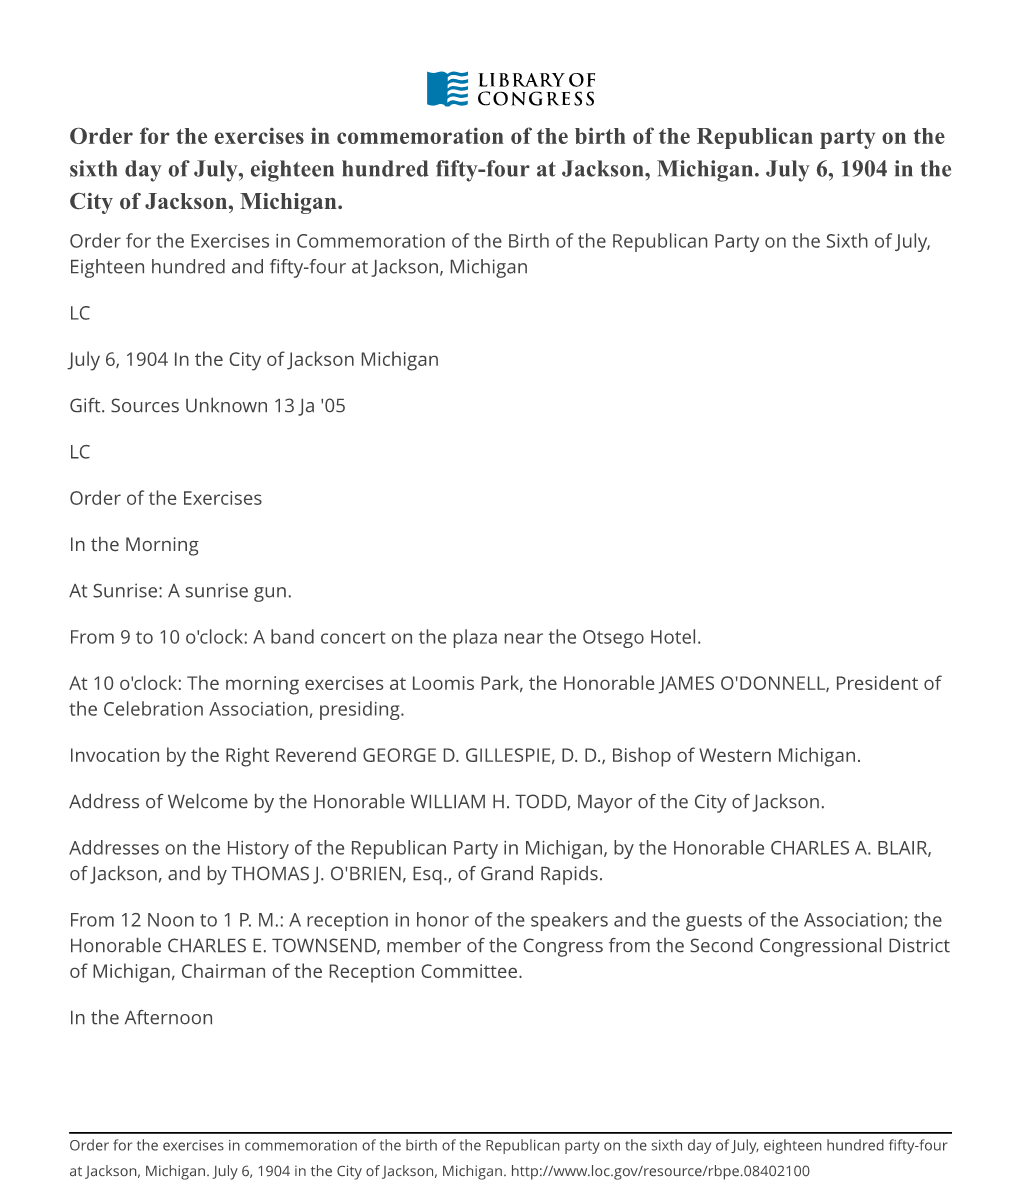 Order for the Exercises in Commemoration of the Birth of the Republican Party on the Sixth Day of July, Eighteen Hundred Fifty-Four at Jackson, Michigan